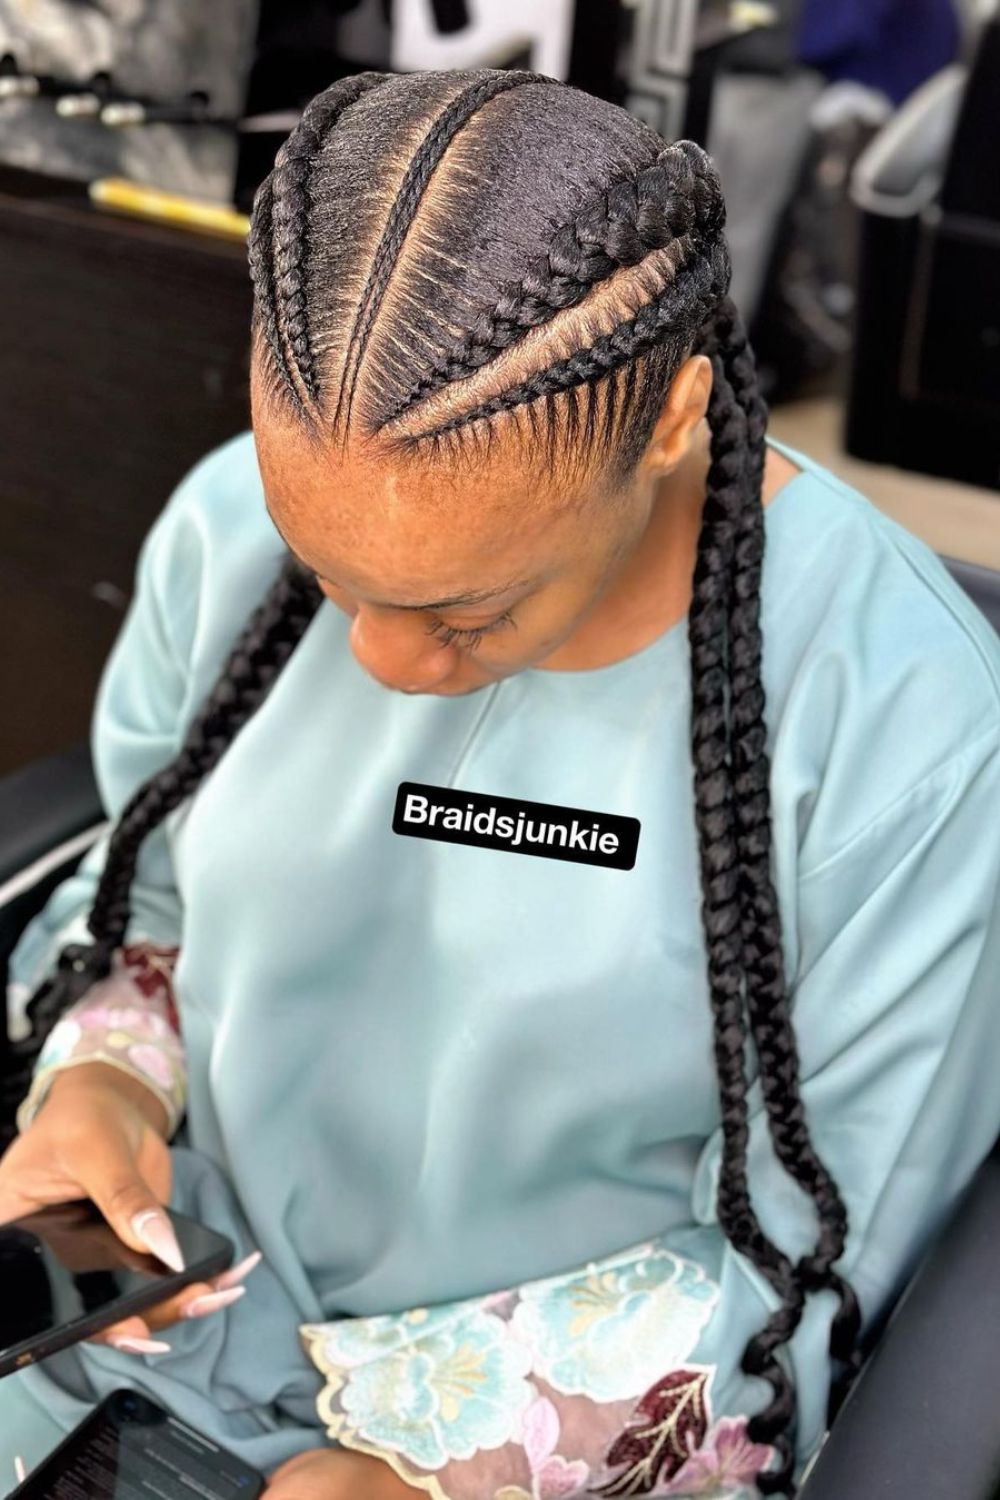 A woman with cornrows hairstyle.